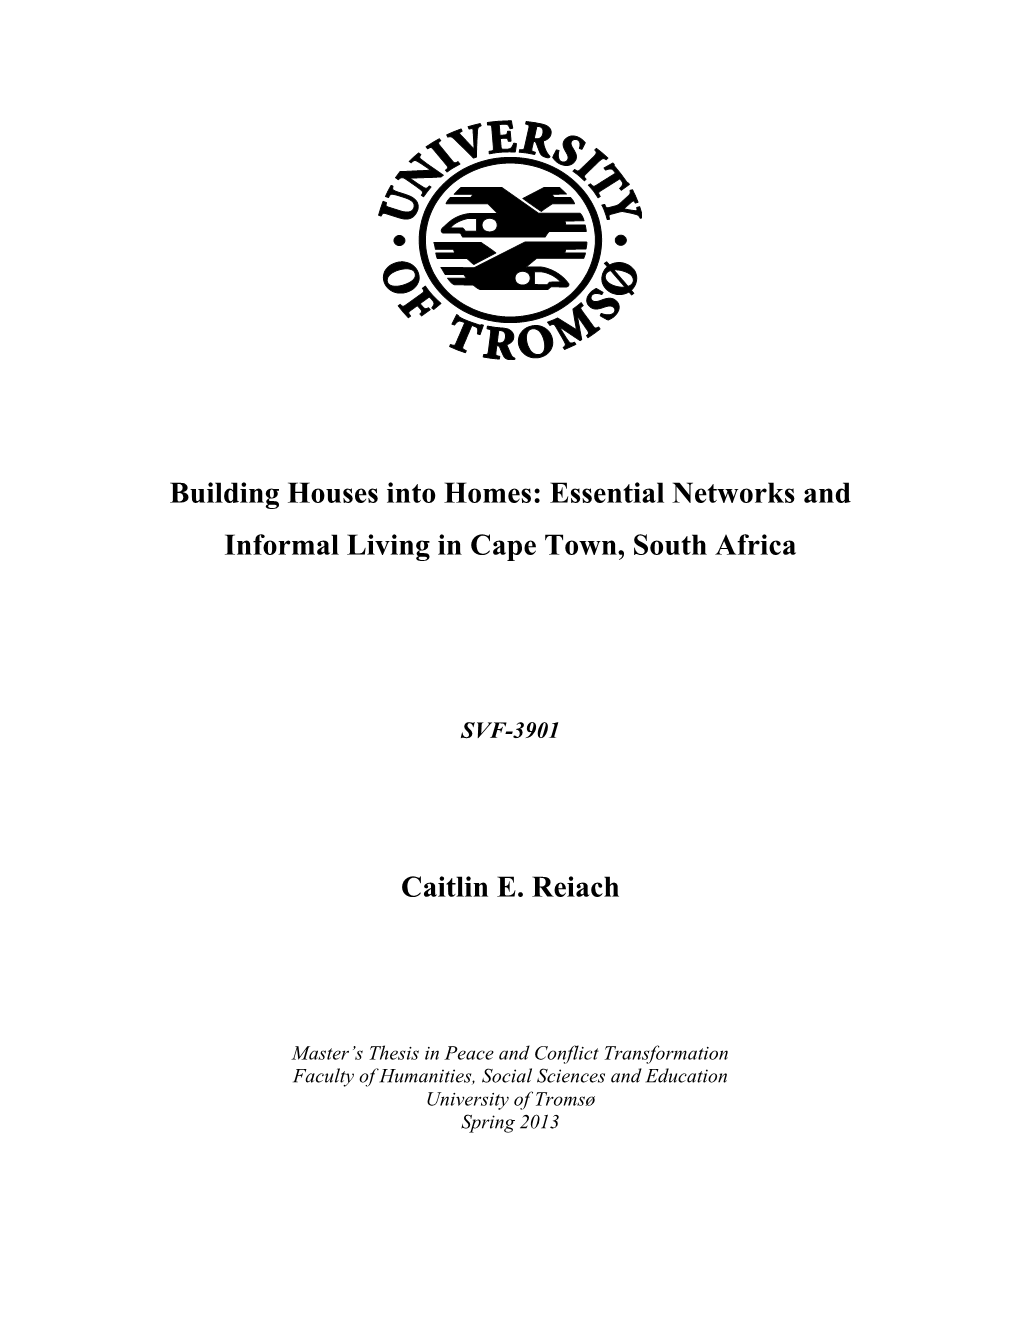 Building Houses Into Homes: Essential Networks and Informal Living in Cape Town, South Africa